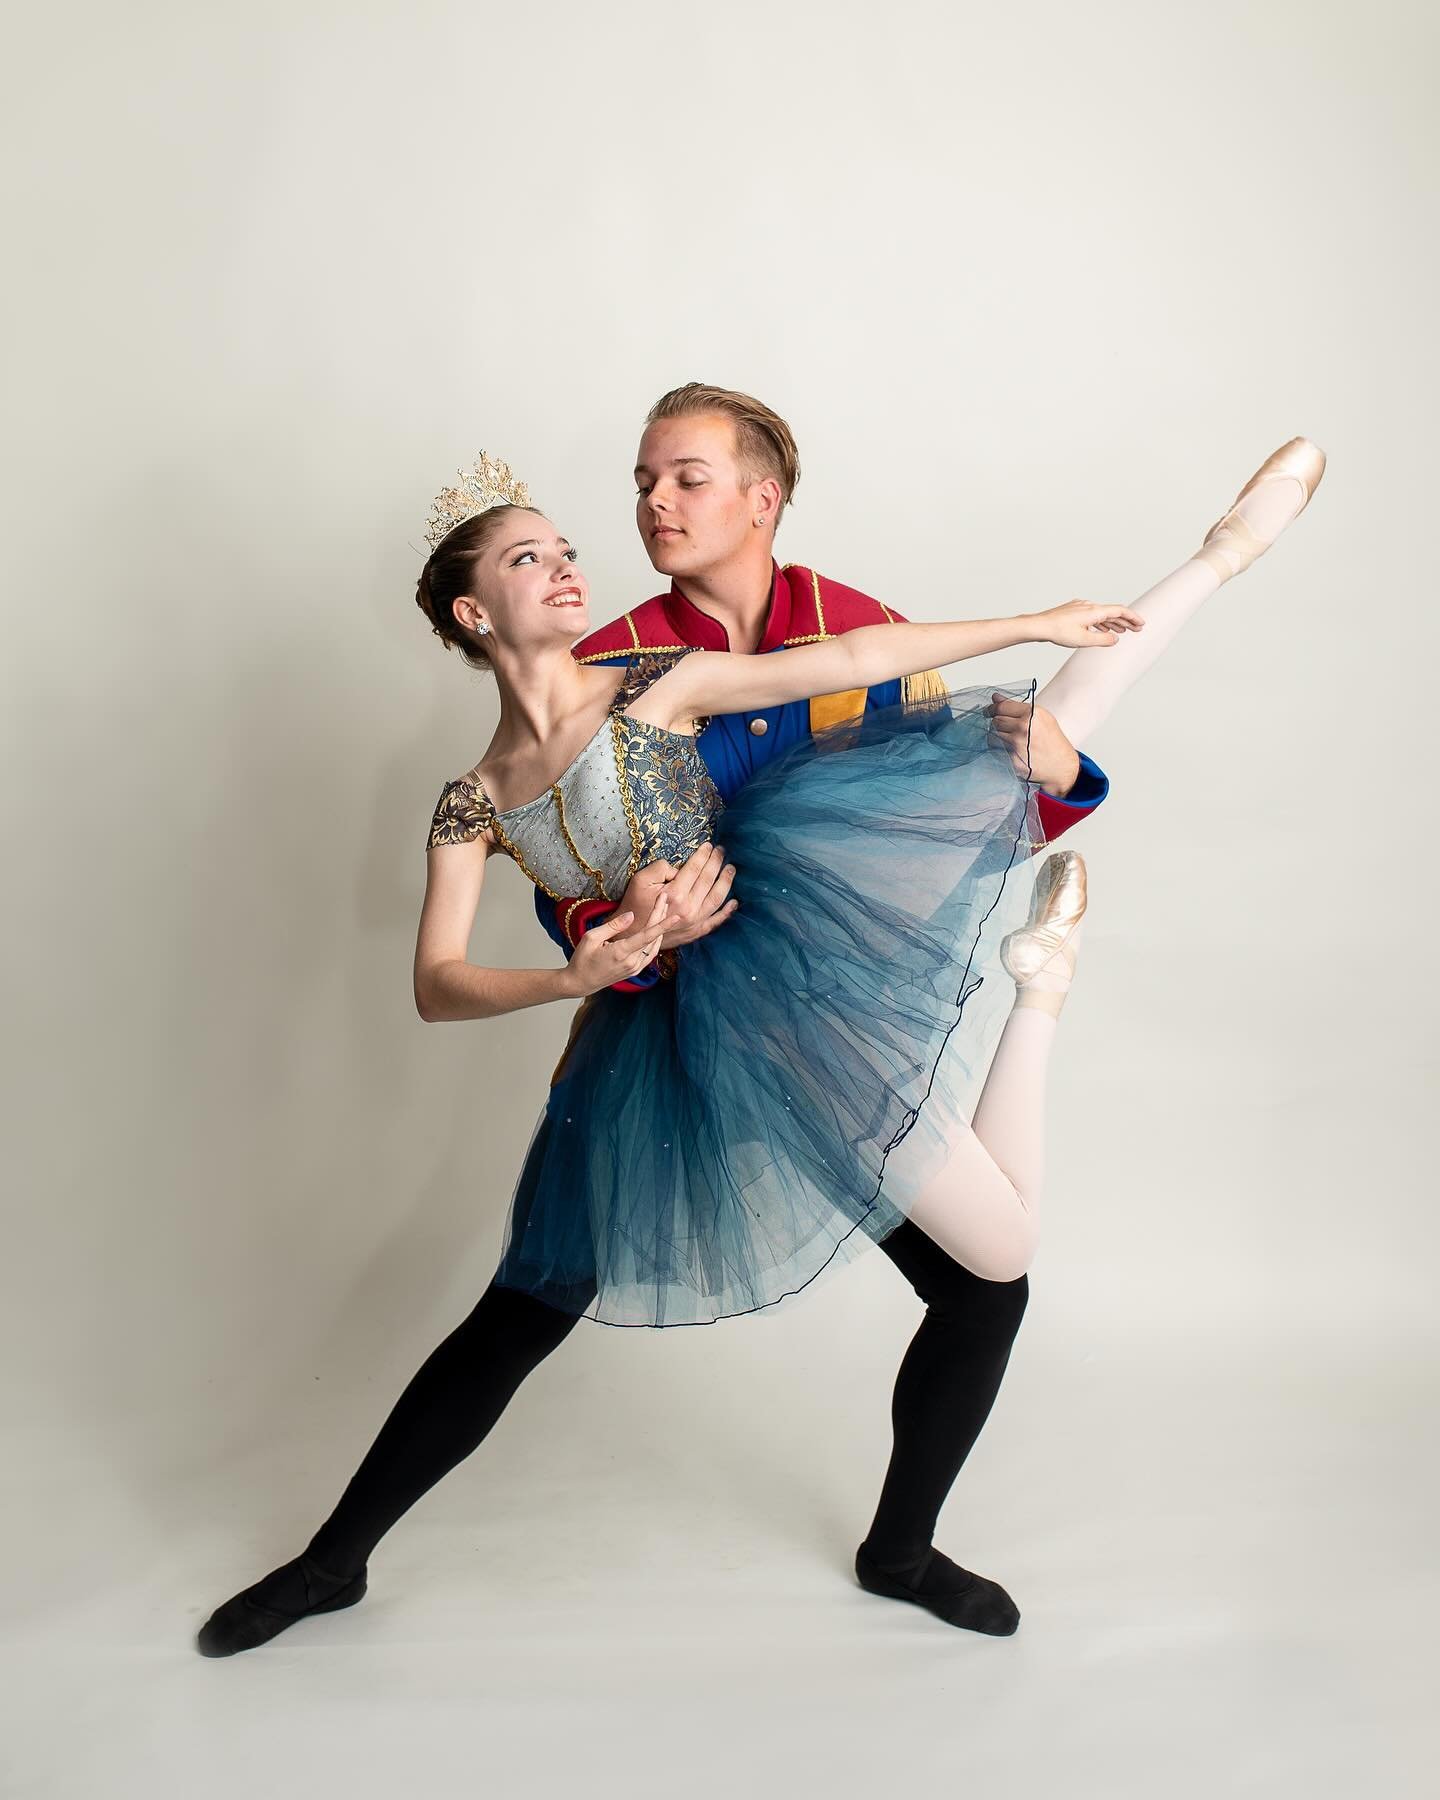 EPAC will be presenting the ballet, CINDERELLA, on June 1st &amp; June 2nd! This is a beautiful love story along with hilarious humor! It&rsquo;s a ballet for all ages! You won&rsquo;t want to miss it! 

🎟️🎟️ ⬆️Link in bio to purchase your tickets!